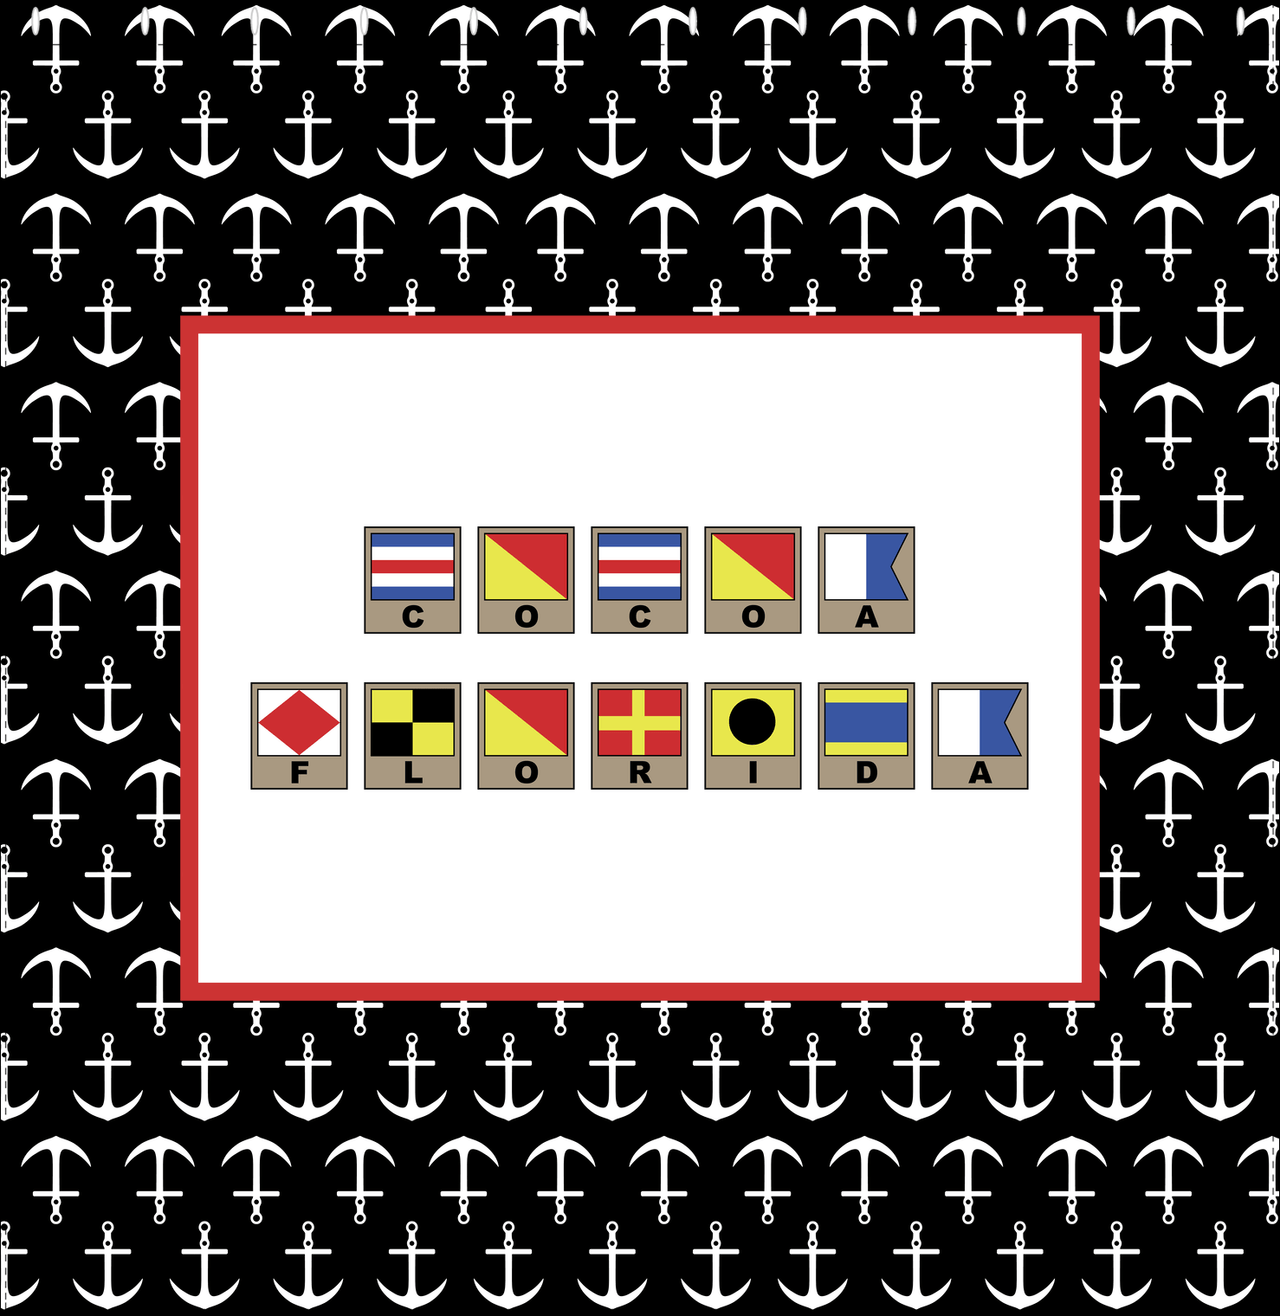 Personalized Nautical Flags Shower Curtain with Anchors - Black and Red - Flags with Light Brown Frames - Decorate View